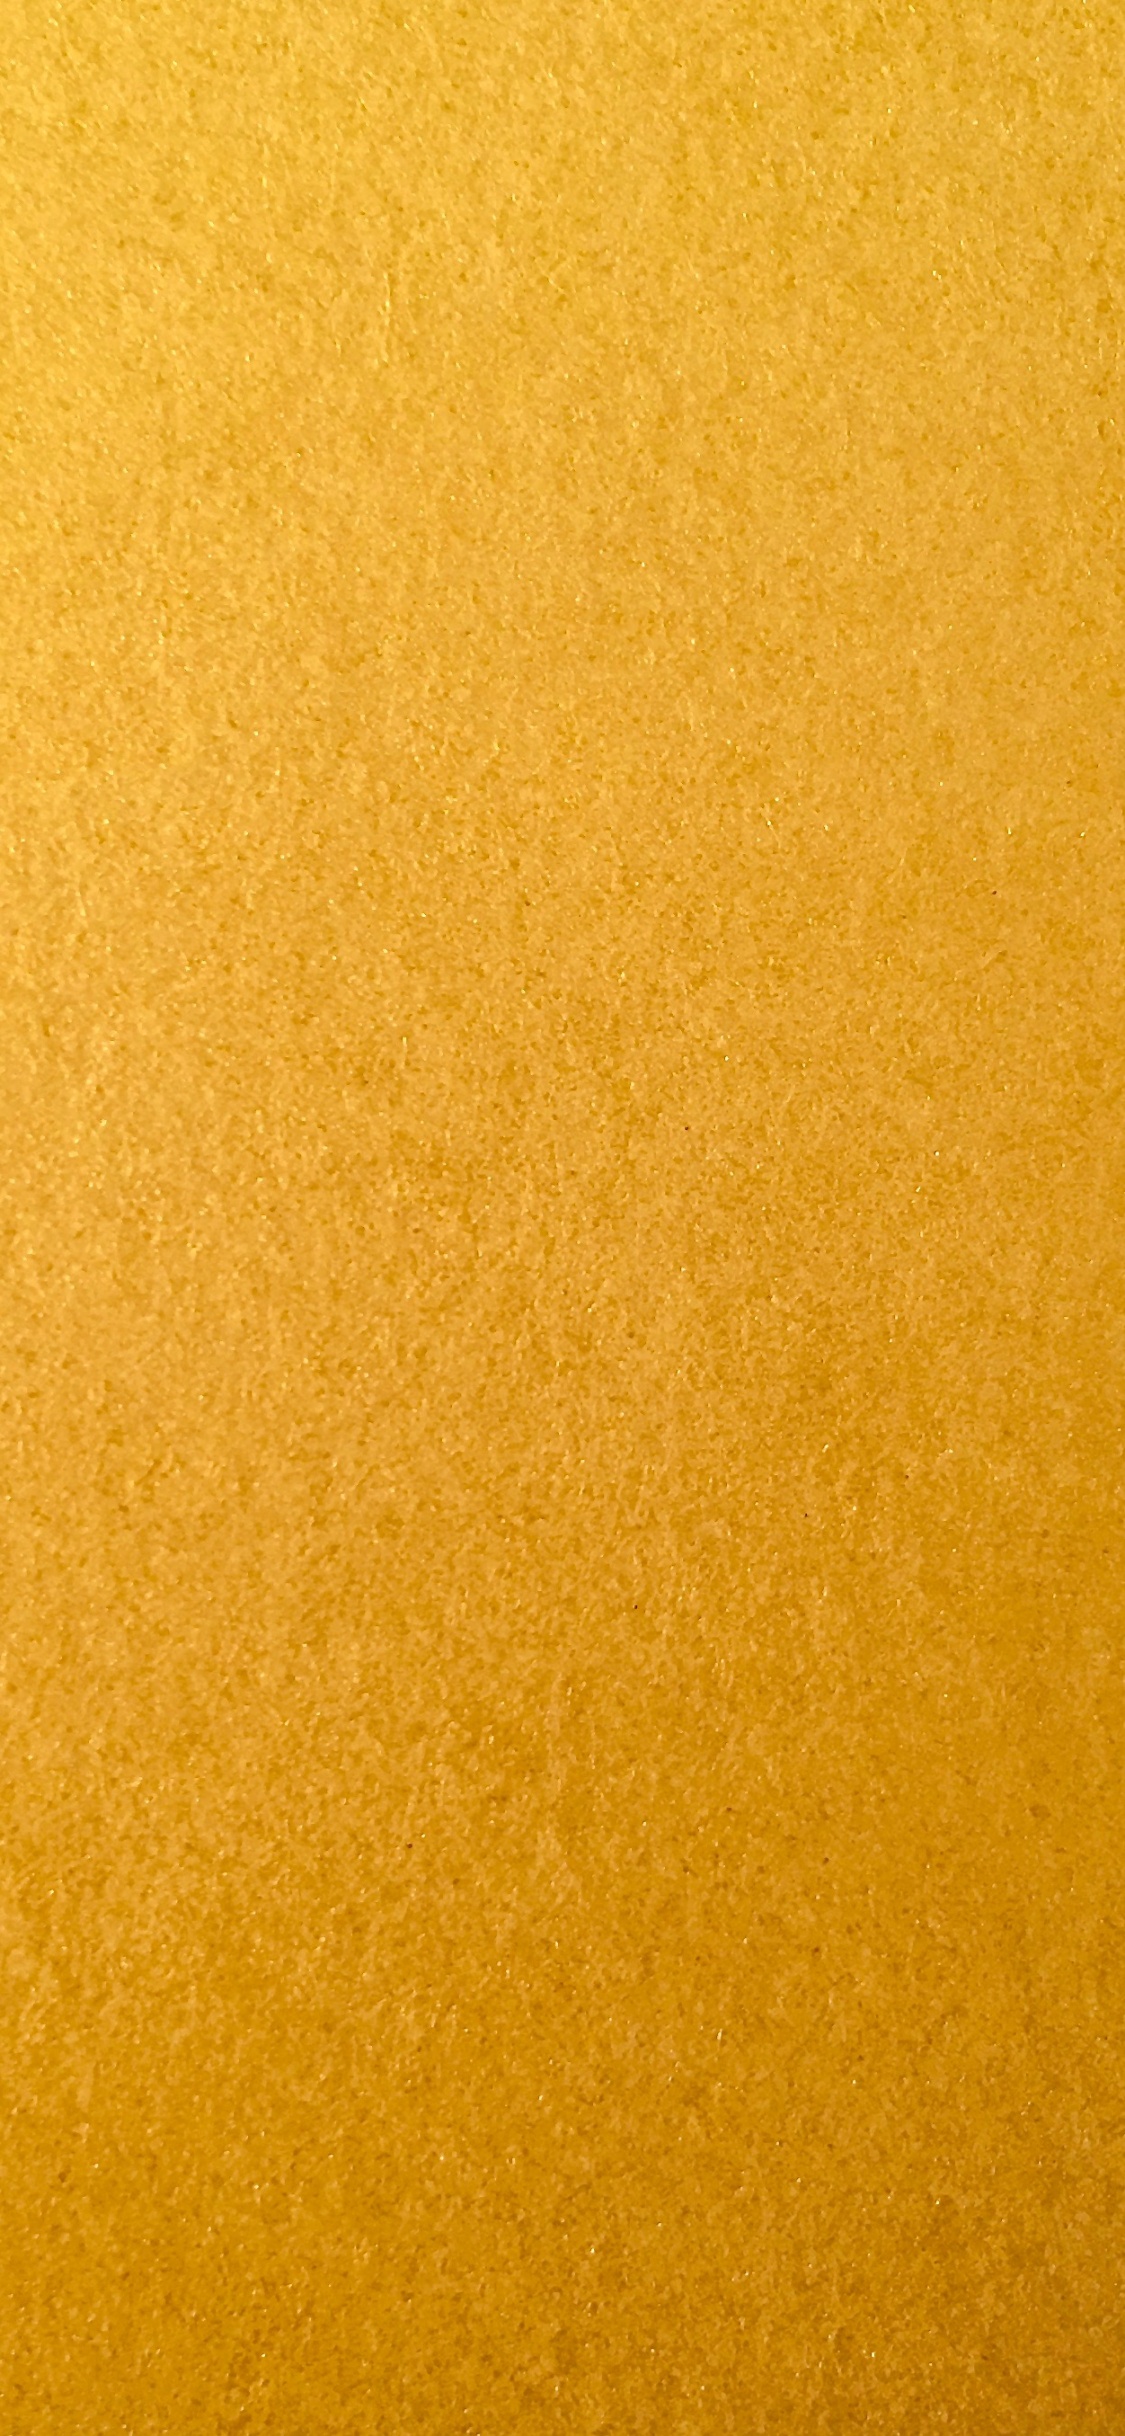 Yellow Textile in Close up Image. Wallpaper in 1125x2436 Resolution